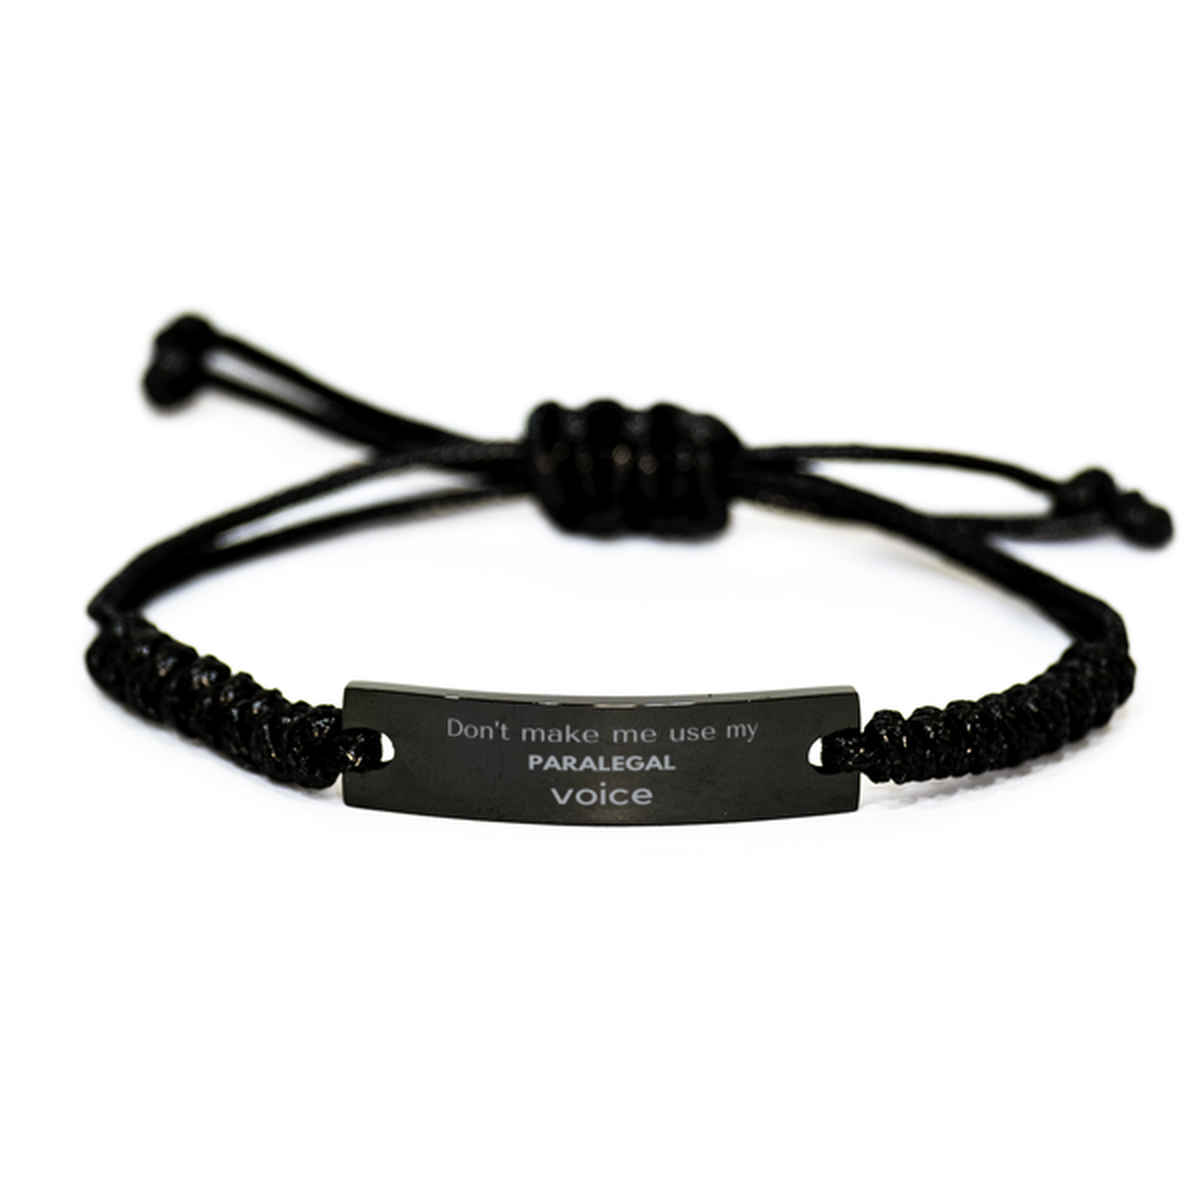 Don't make me use my Paralegal voice, Sarcasm Paralegal Gifts, Christmas Paralegal Black Rope Bracelet Birthday Unique Gifts For Paralegal Coworkers, Men, Women, Colleague, Friends